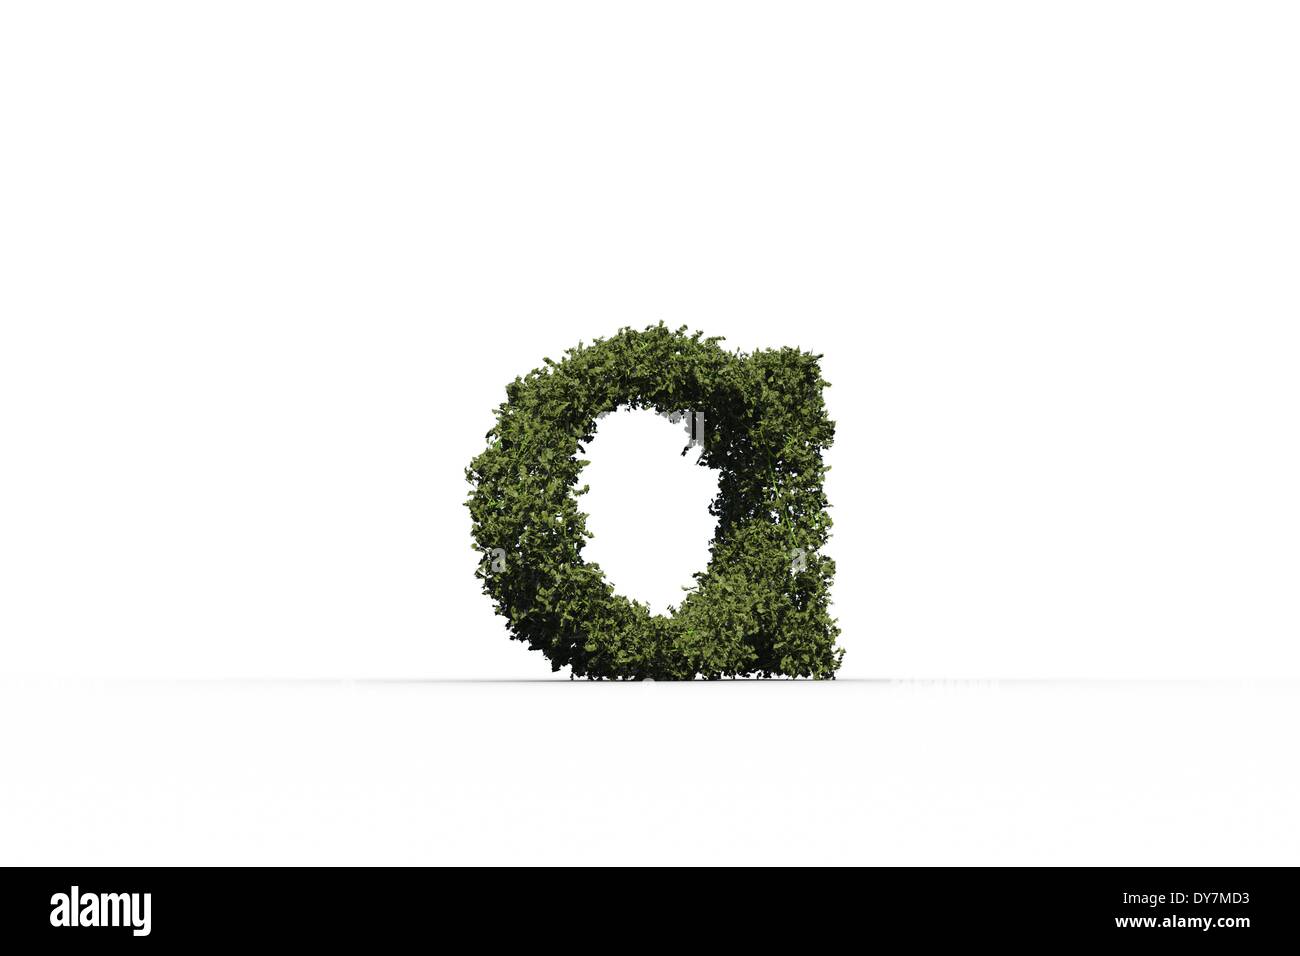 Lower case letter a made of leaves Stock Photo